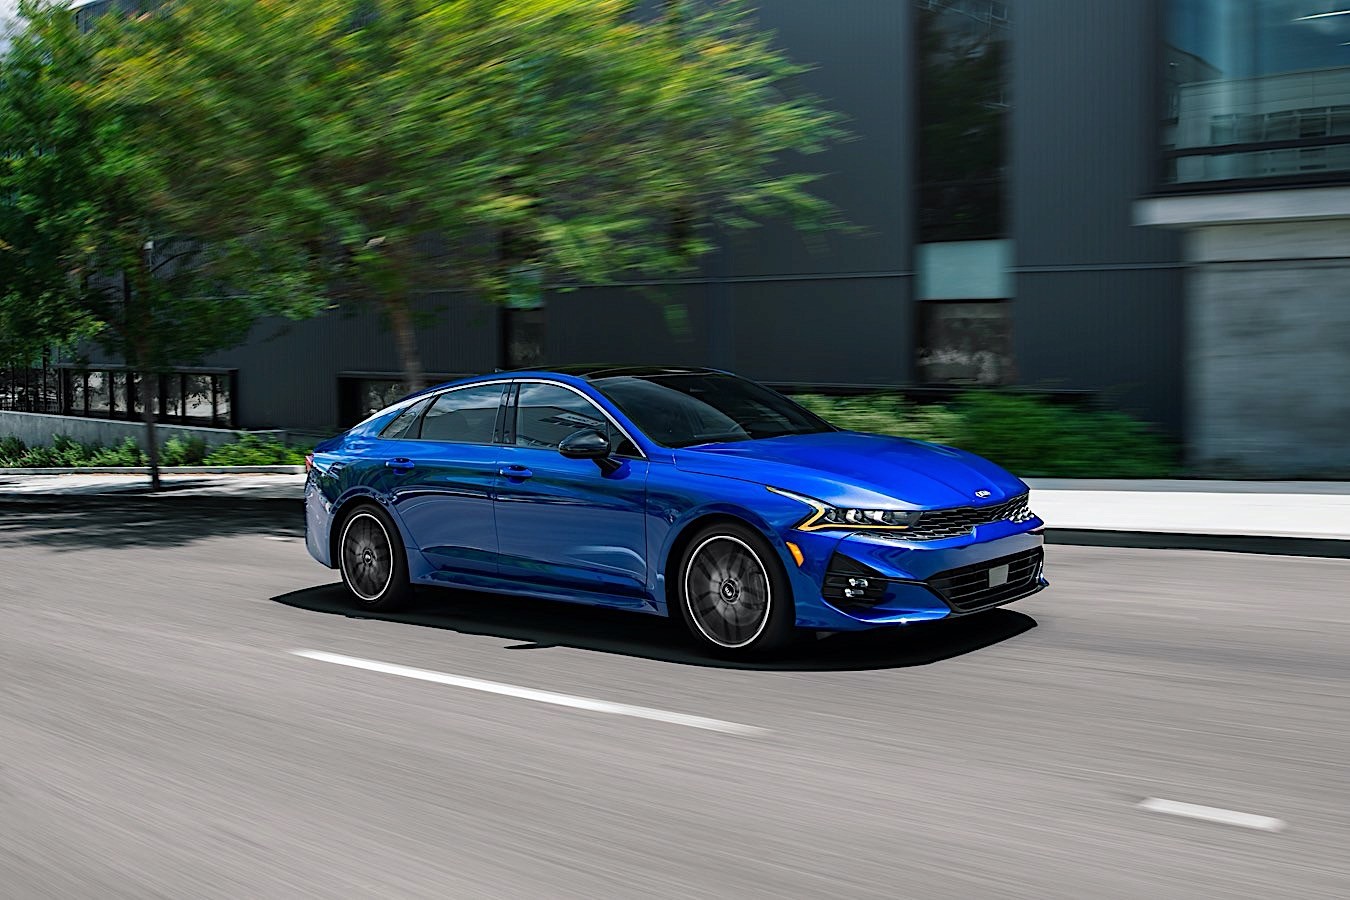 2021 K5 Is the Most Powerful Kia Mid-Size Sedan to Ever Walk This Earth ...